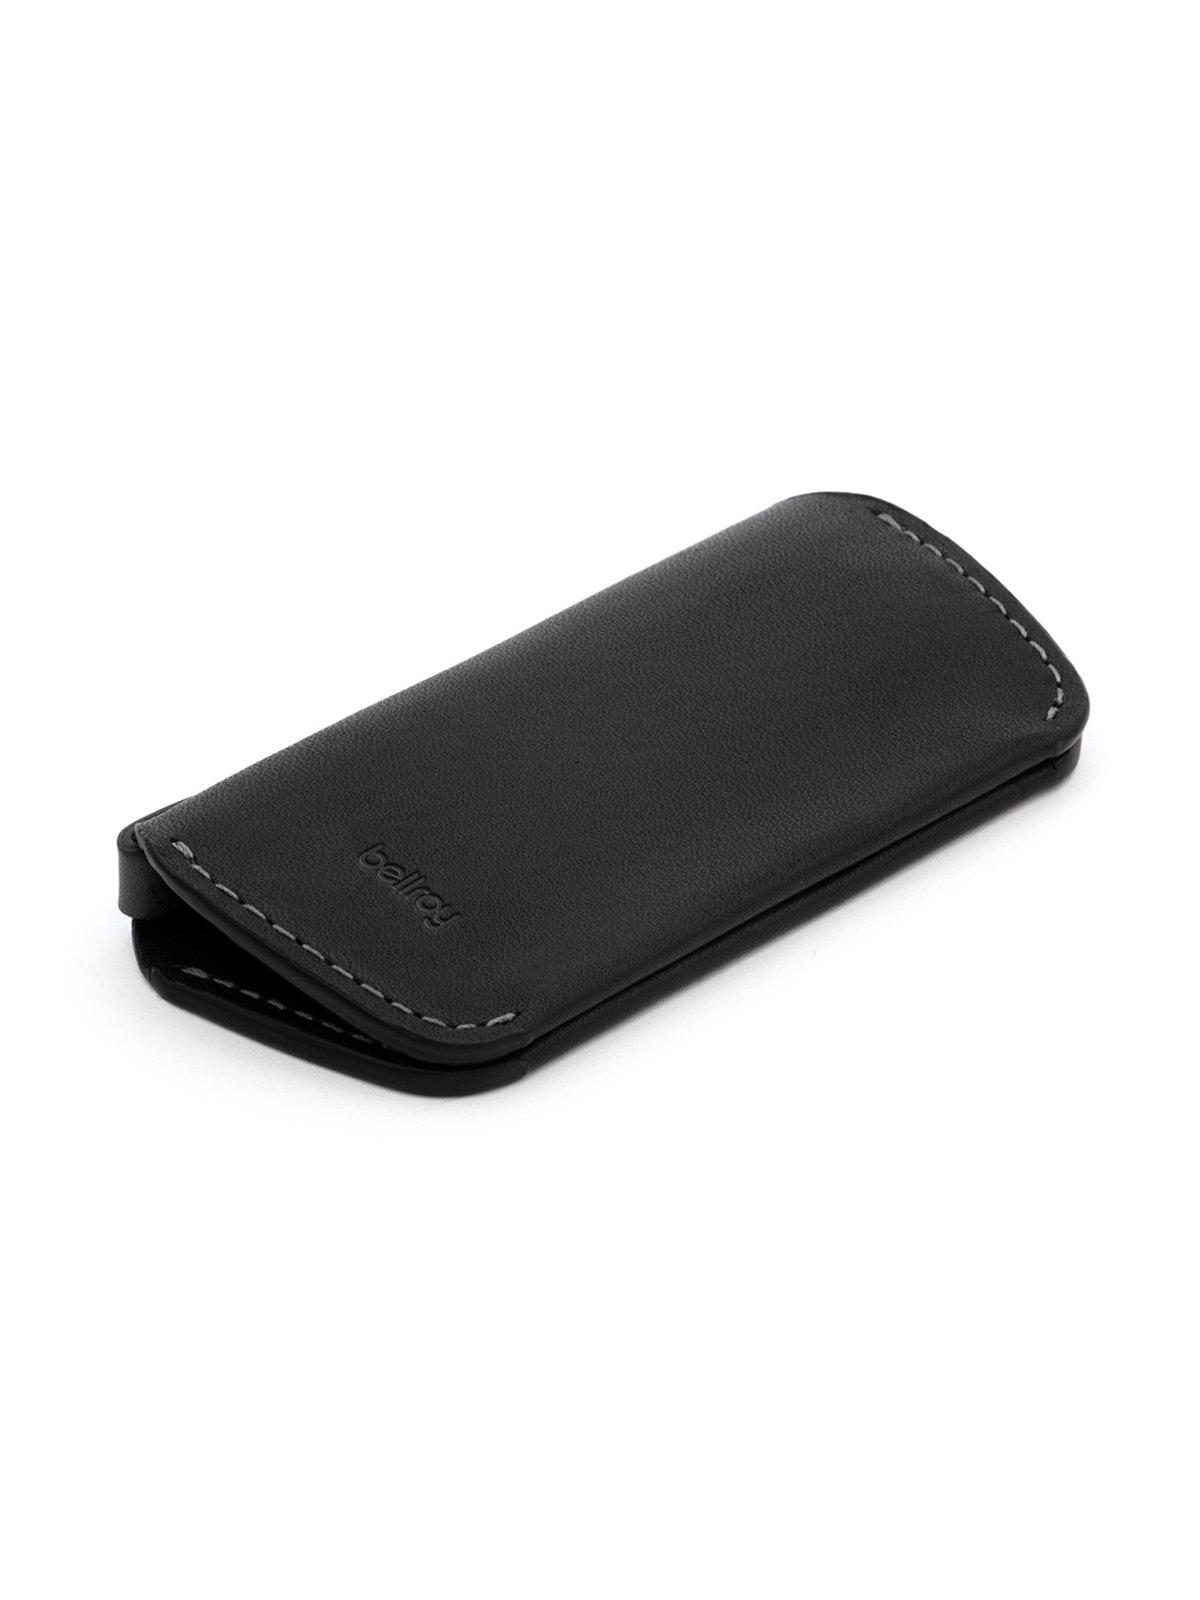 Bellroy Key Cover Plus Black - MORE by Morello Indonesia